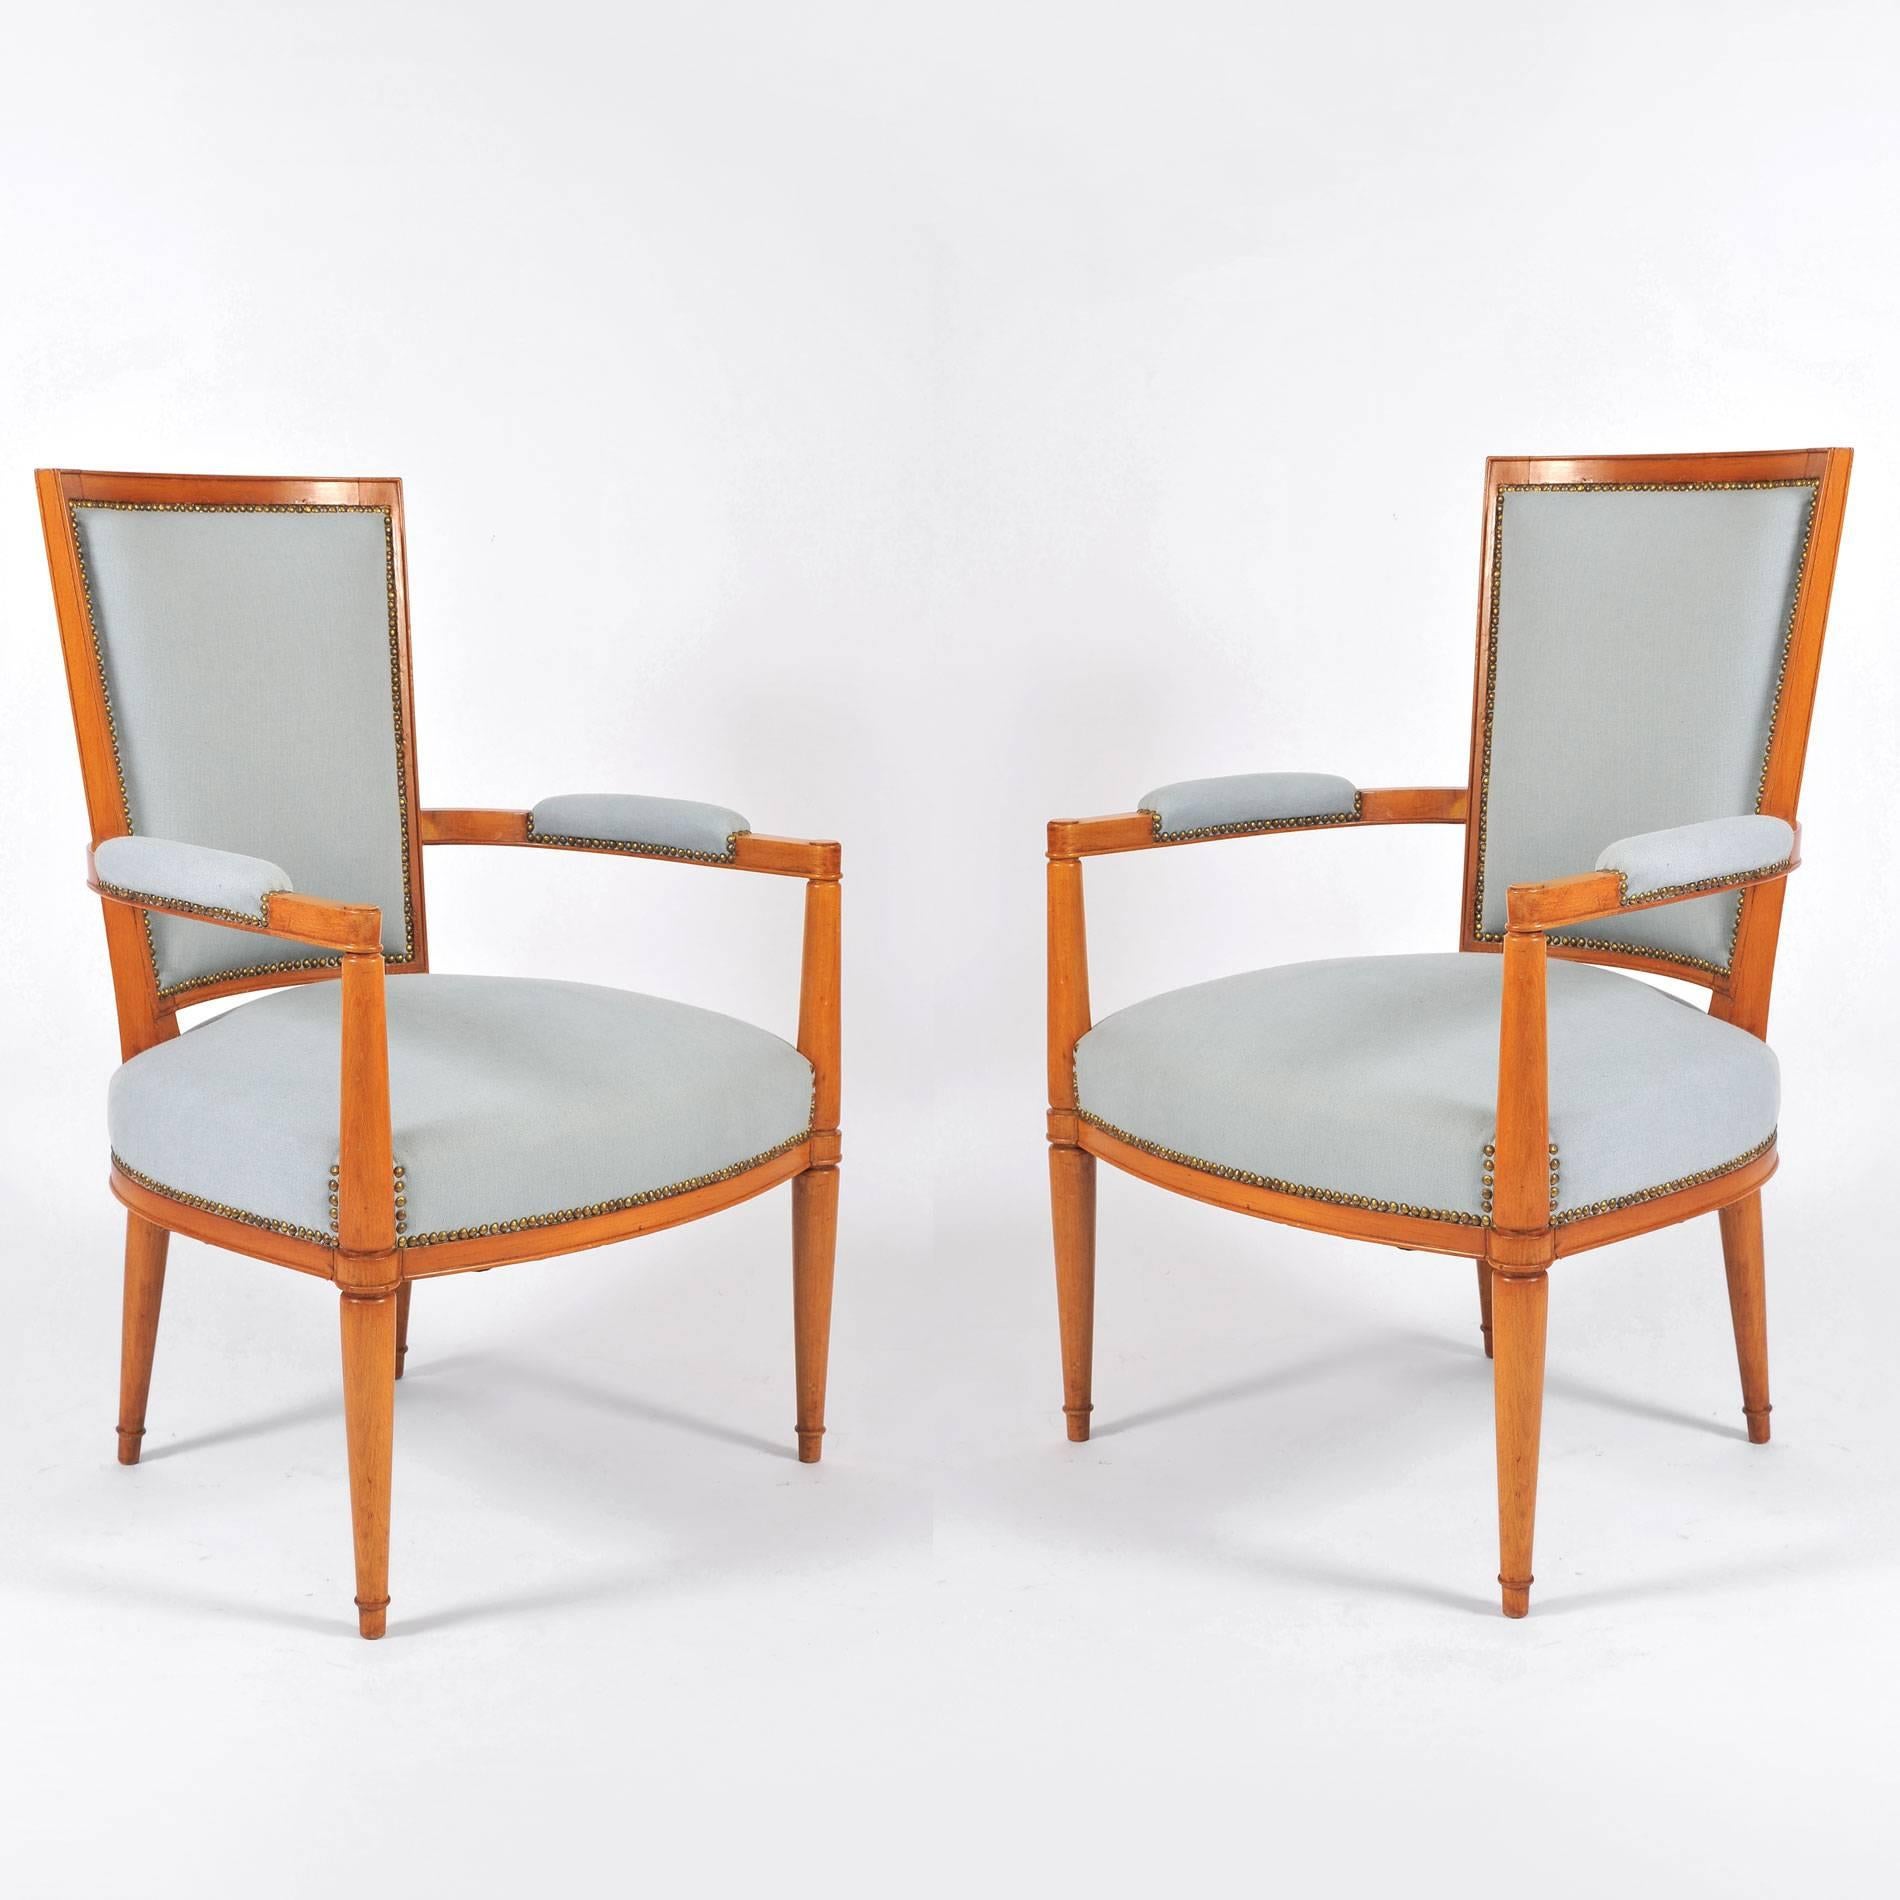 Exceptionally good quality 1930s French chairs from the Arbus workshop privately commissioned in Argentina from Comte by the Edelman family.

Comte was the workshop founded by Ignacio Pirovano in Argentina in 1932 and became famous for its